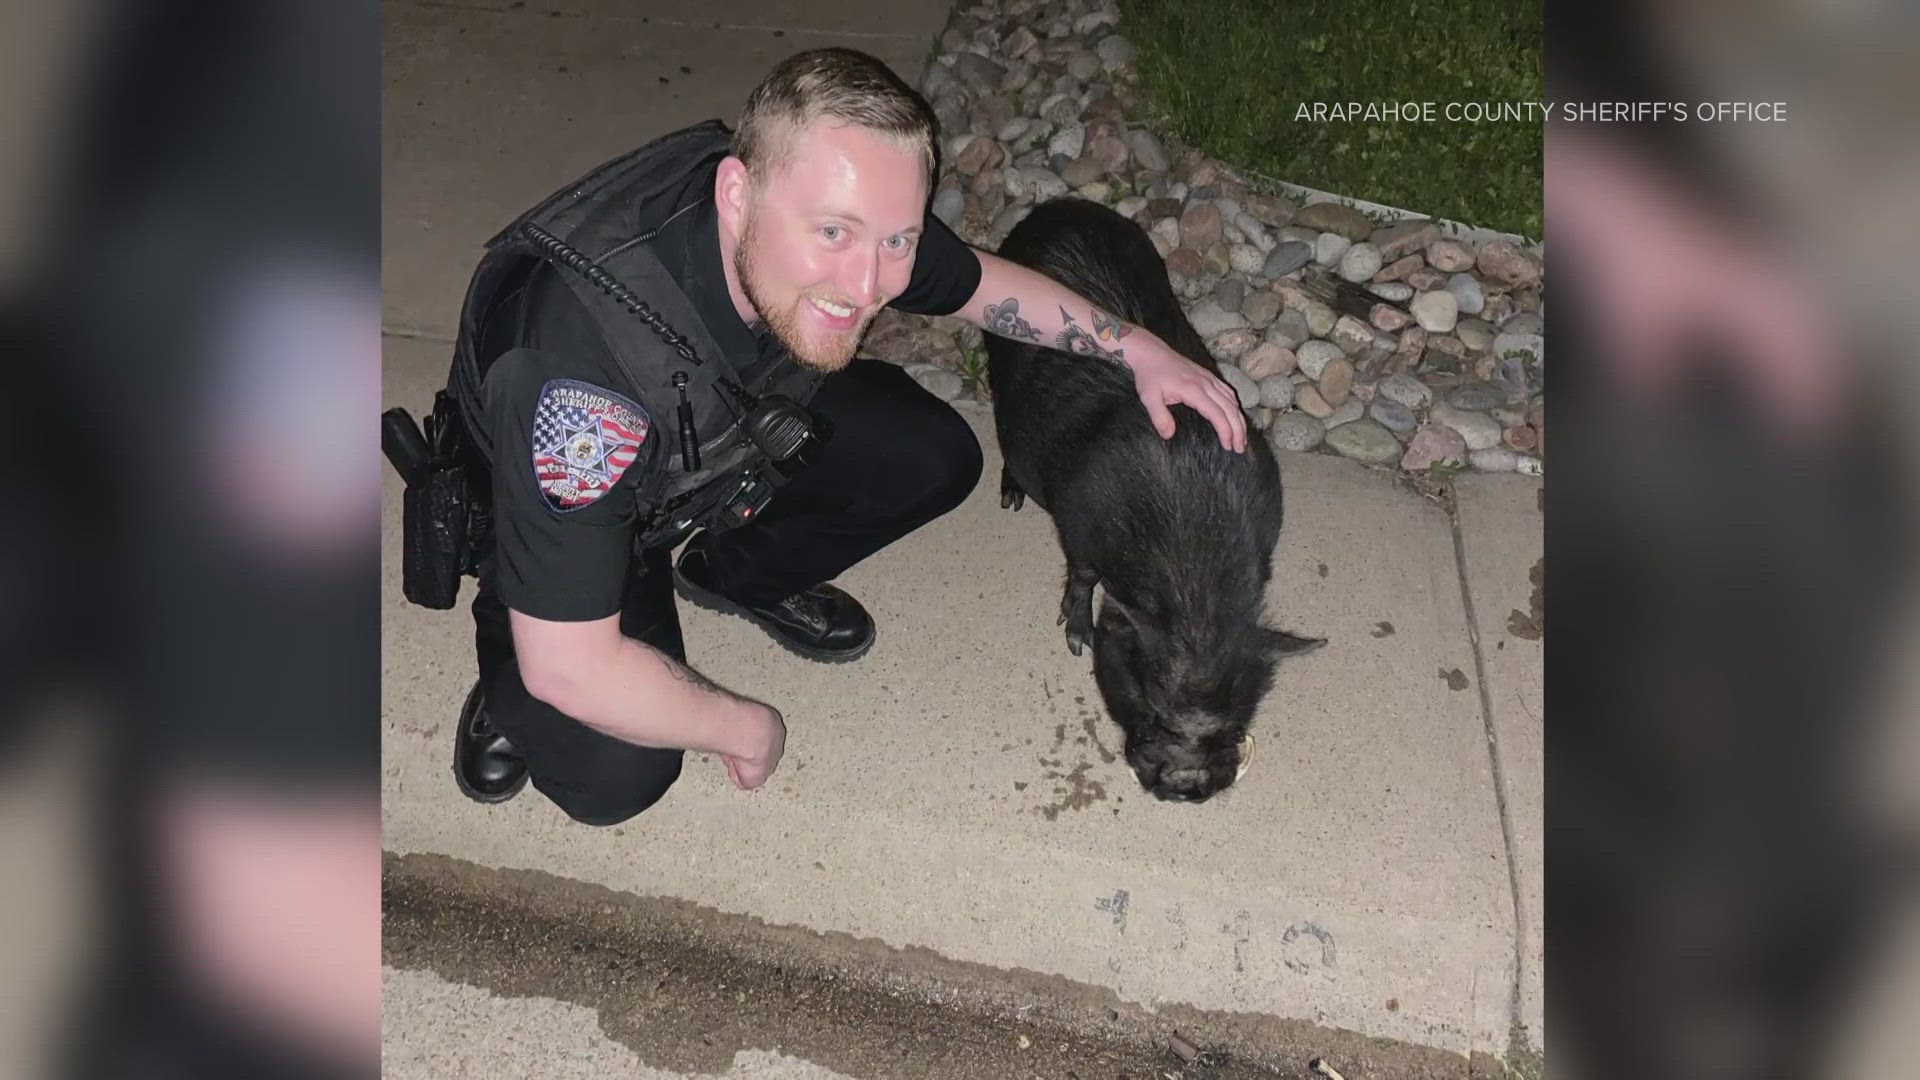 Arapahoe County dispatch received a call of a wayward pig lost on the streets of Centennial.